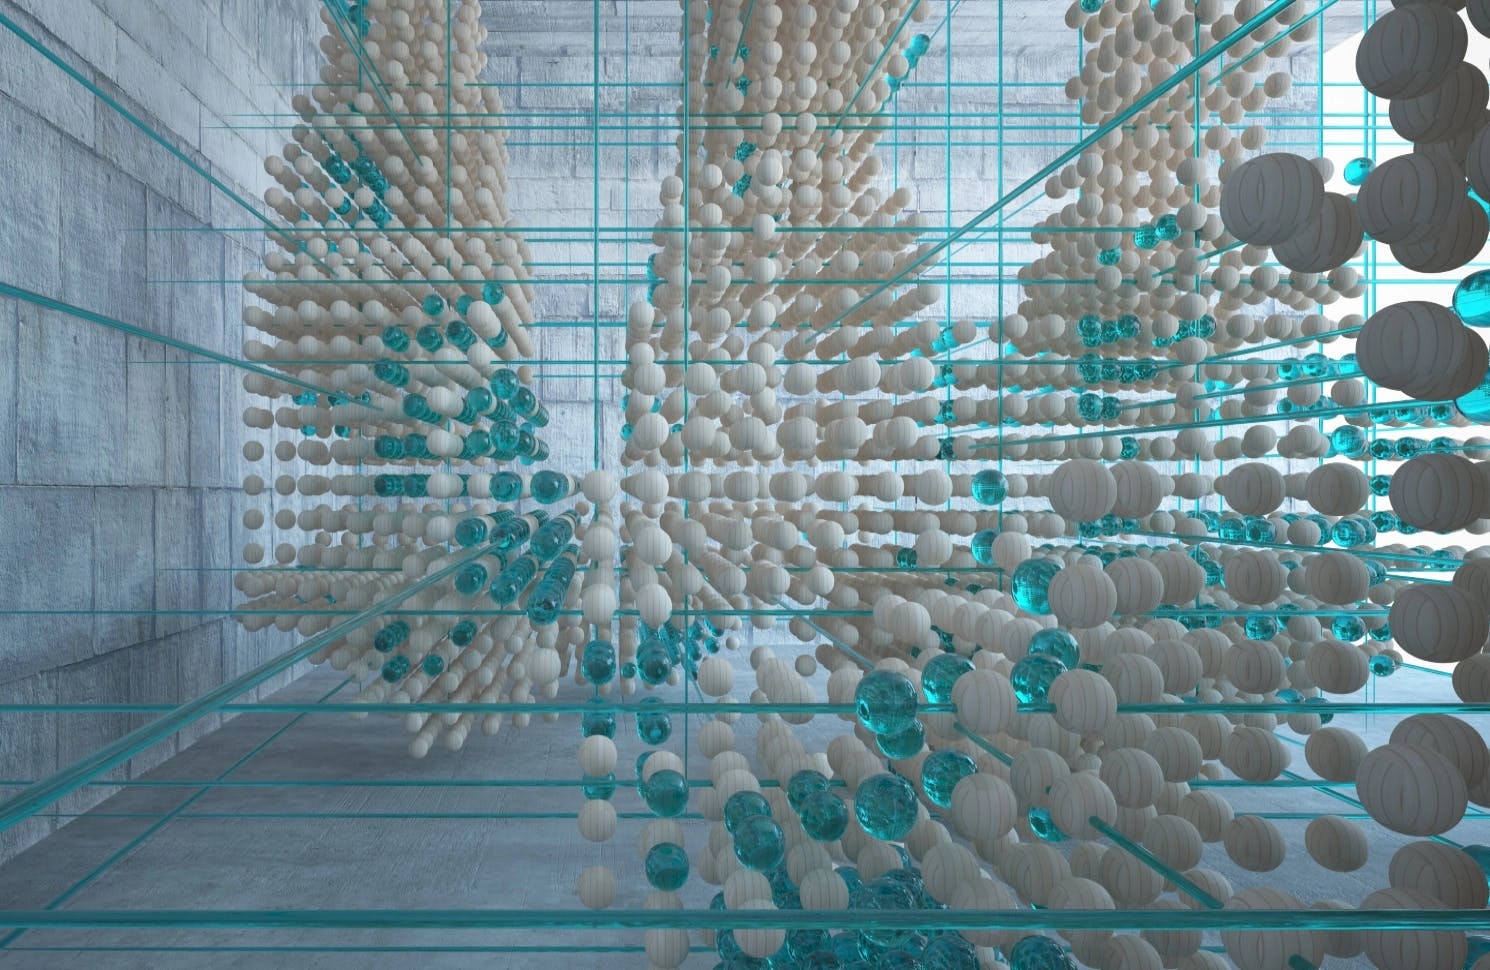 Large glass and wooden beads representing SaaS data fragmentation